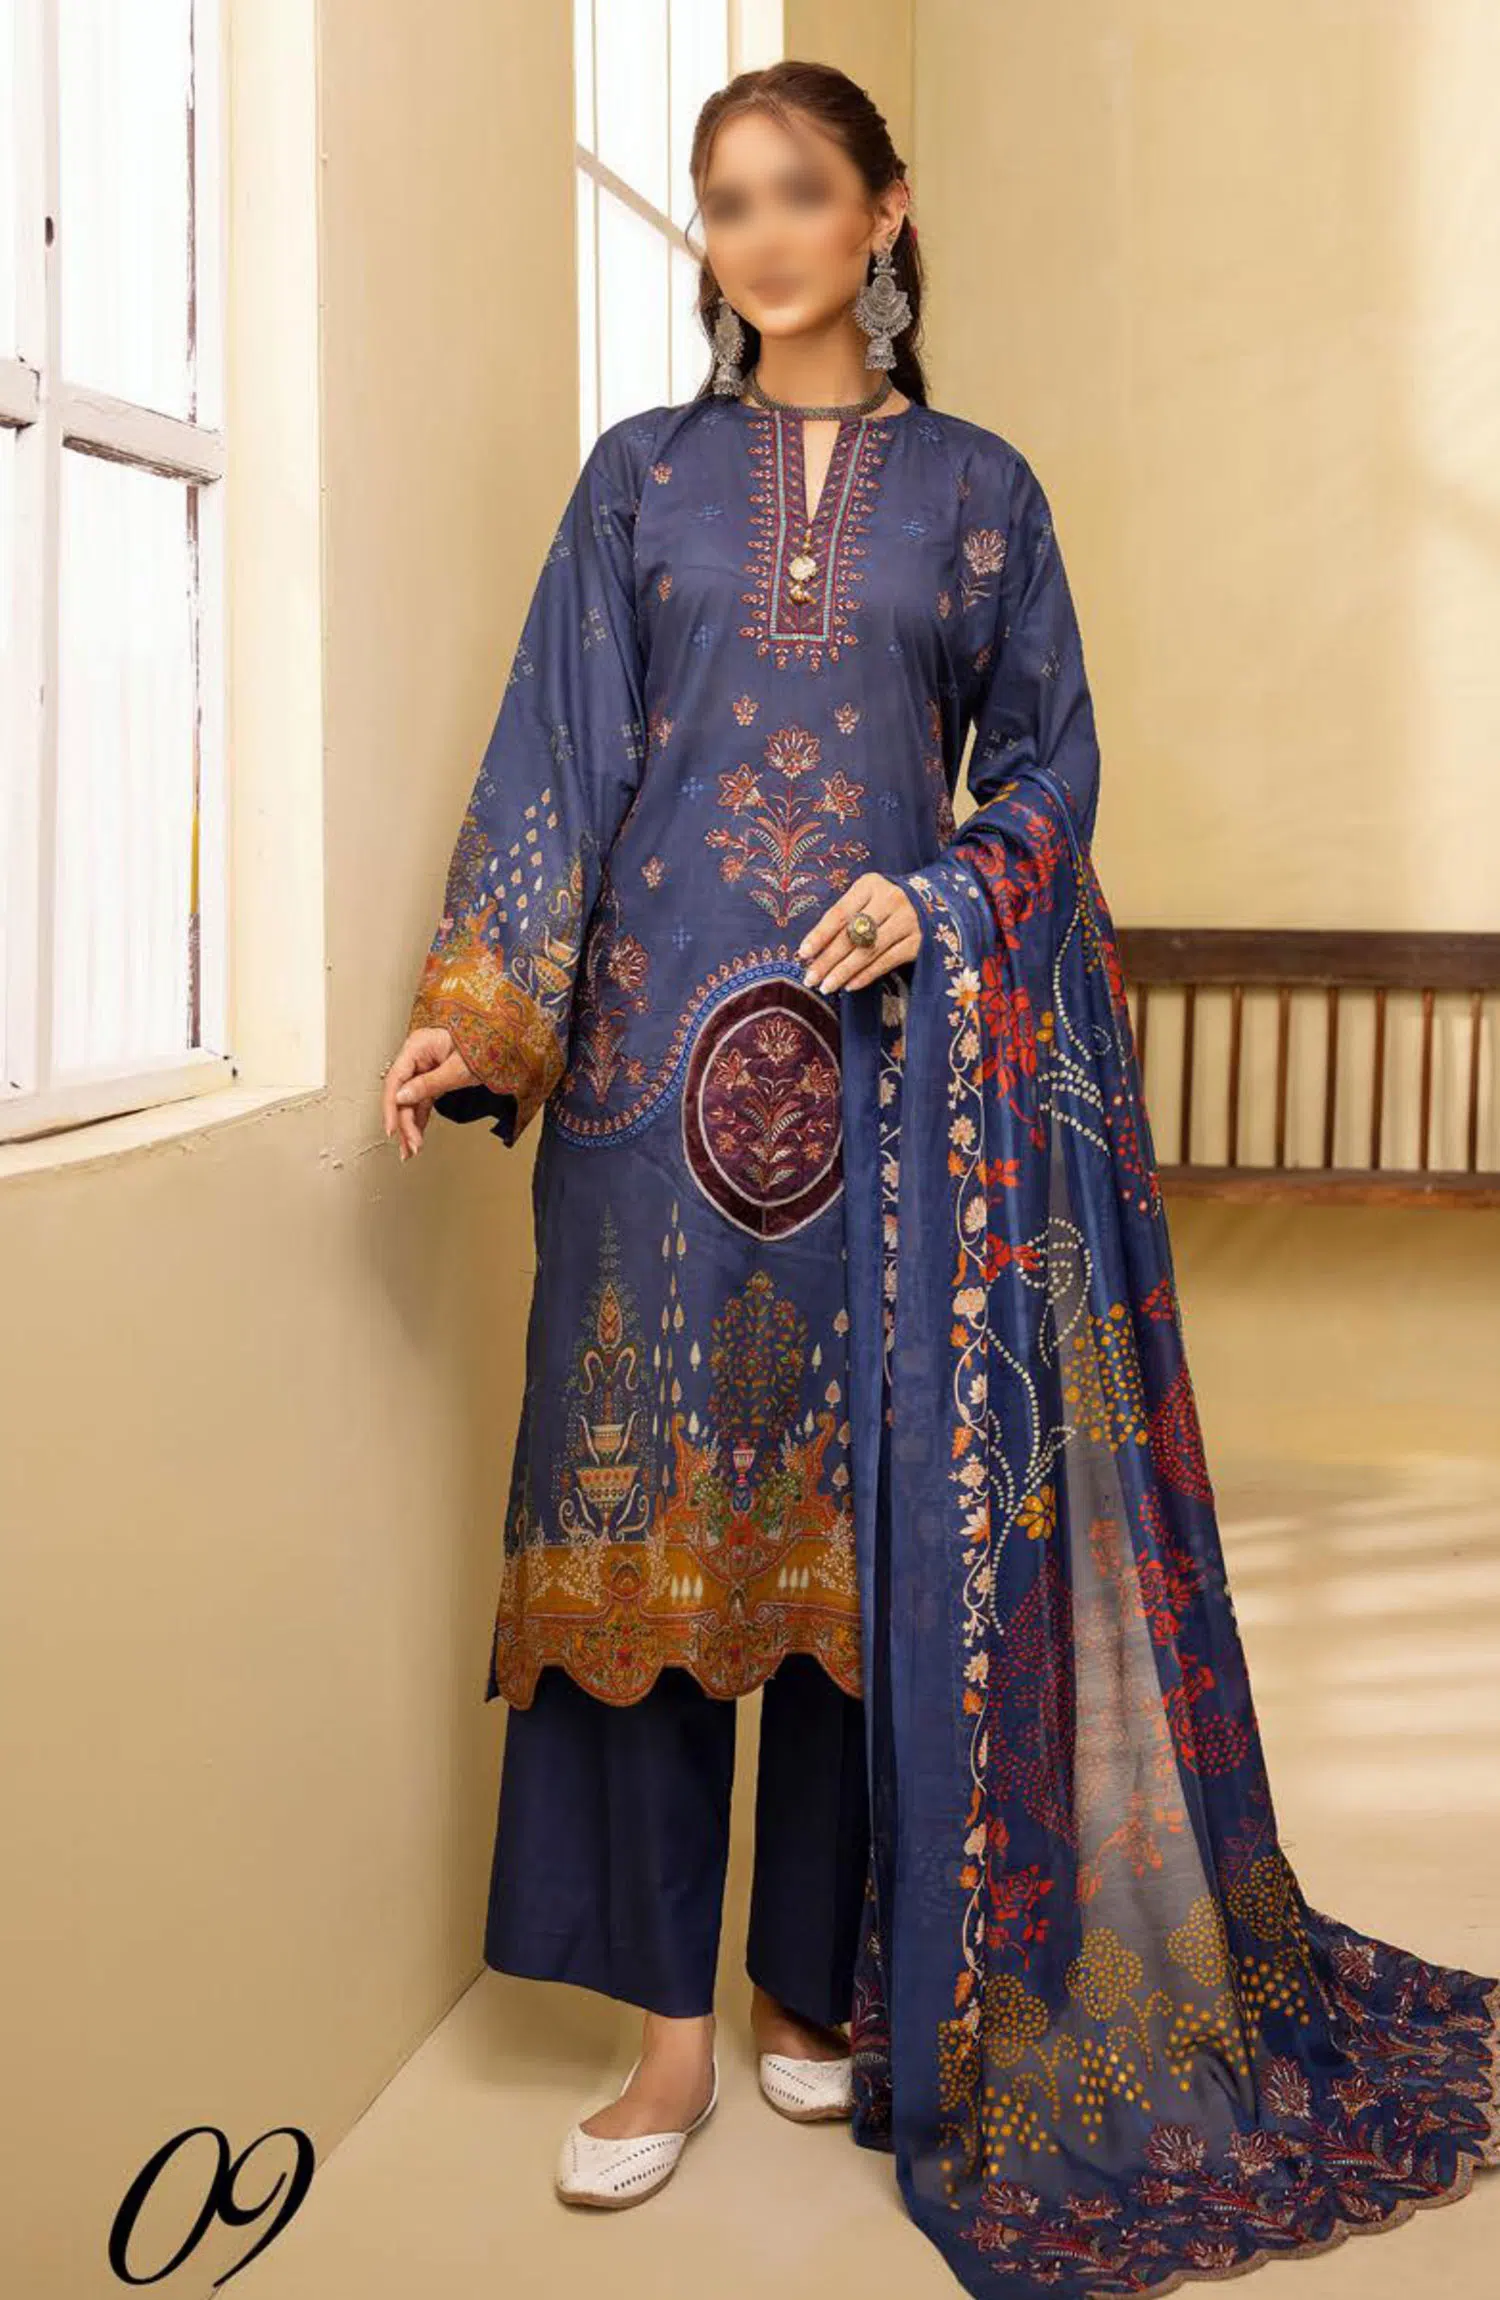 Mahees Ghazal Embroidered Lawn with Emb Voile Dupatta Collection - Design 09